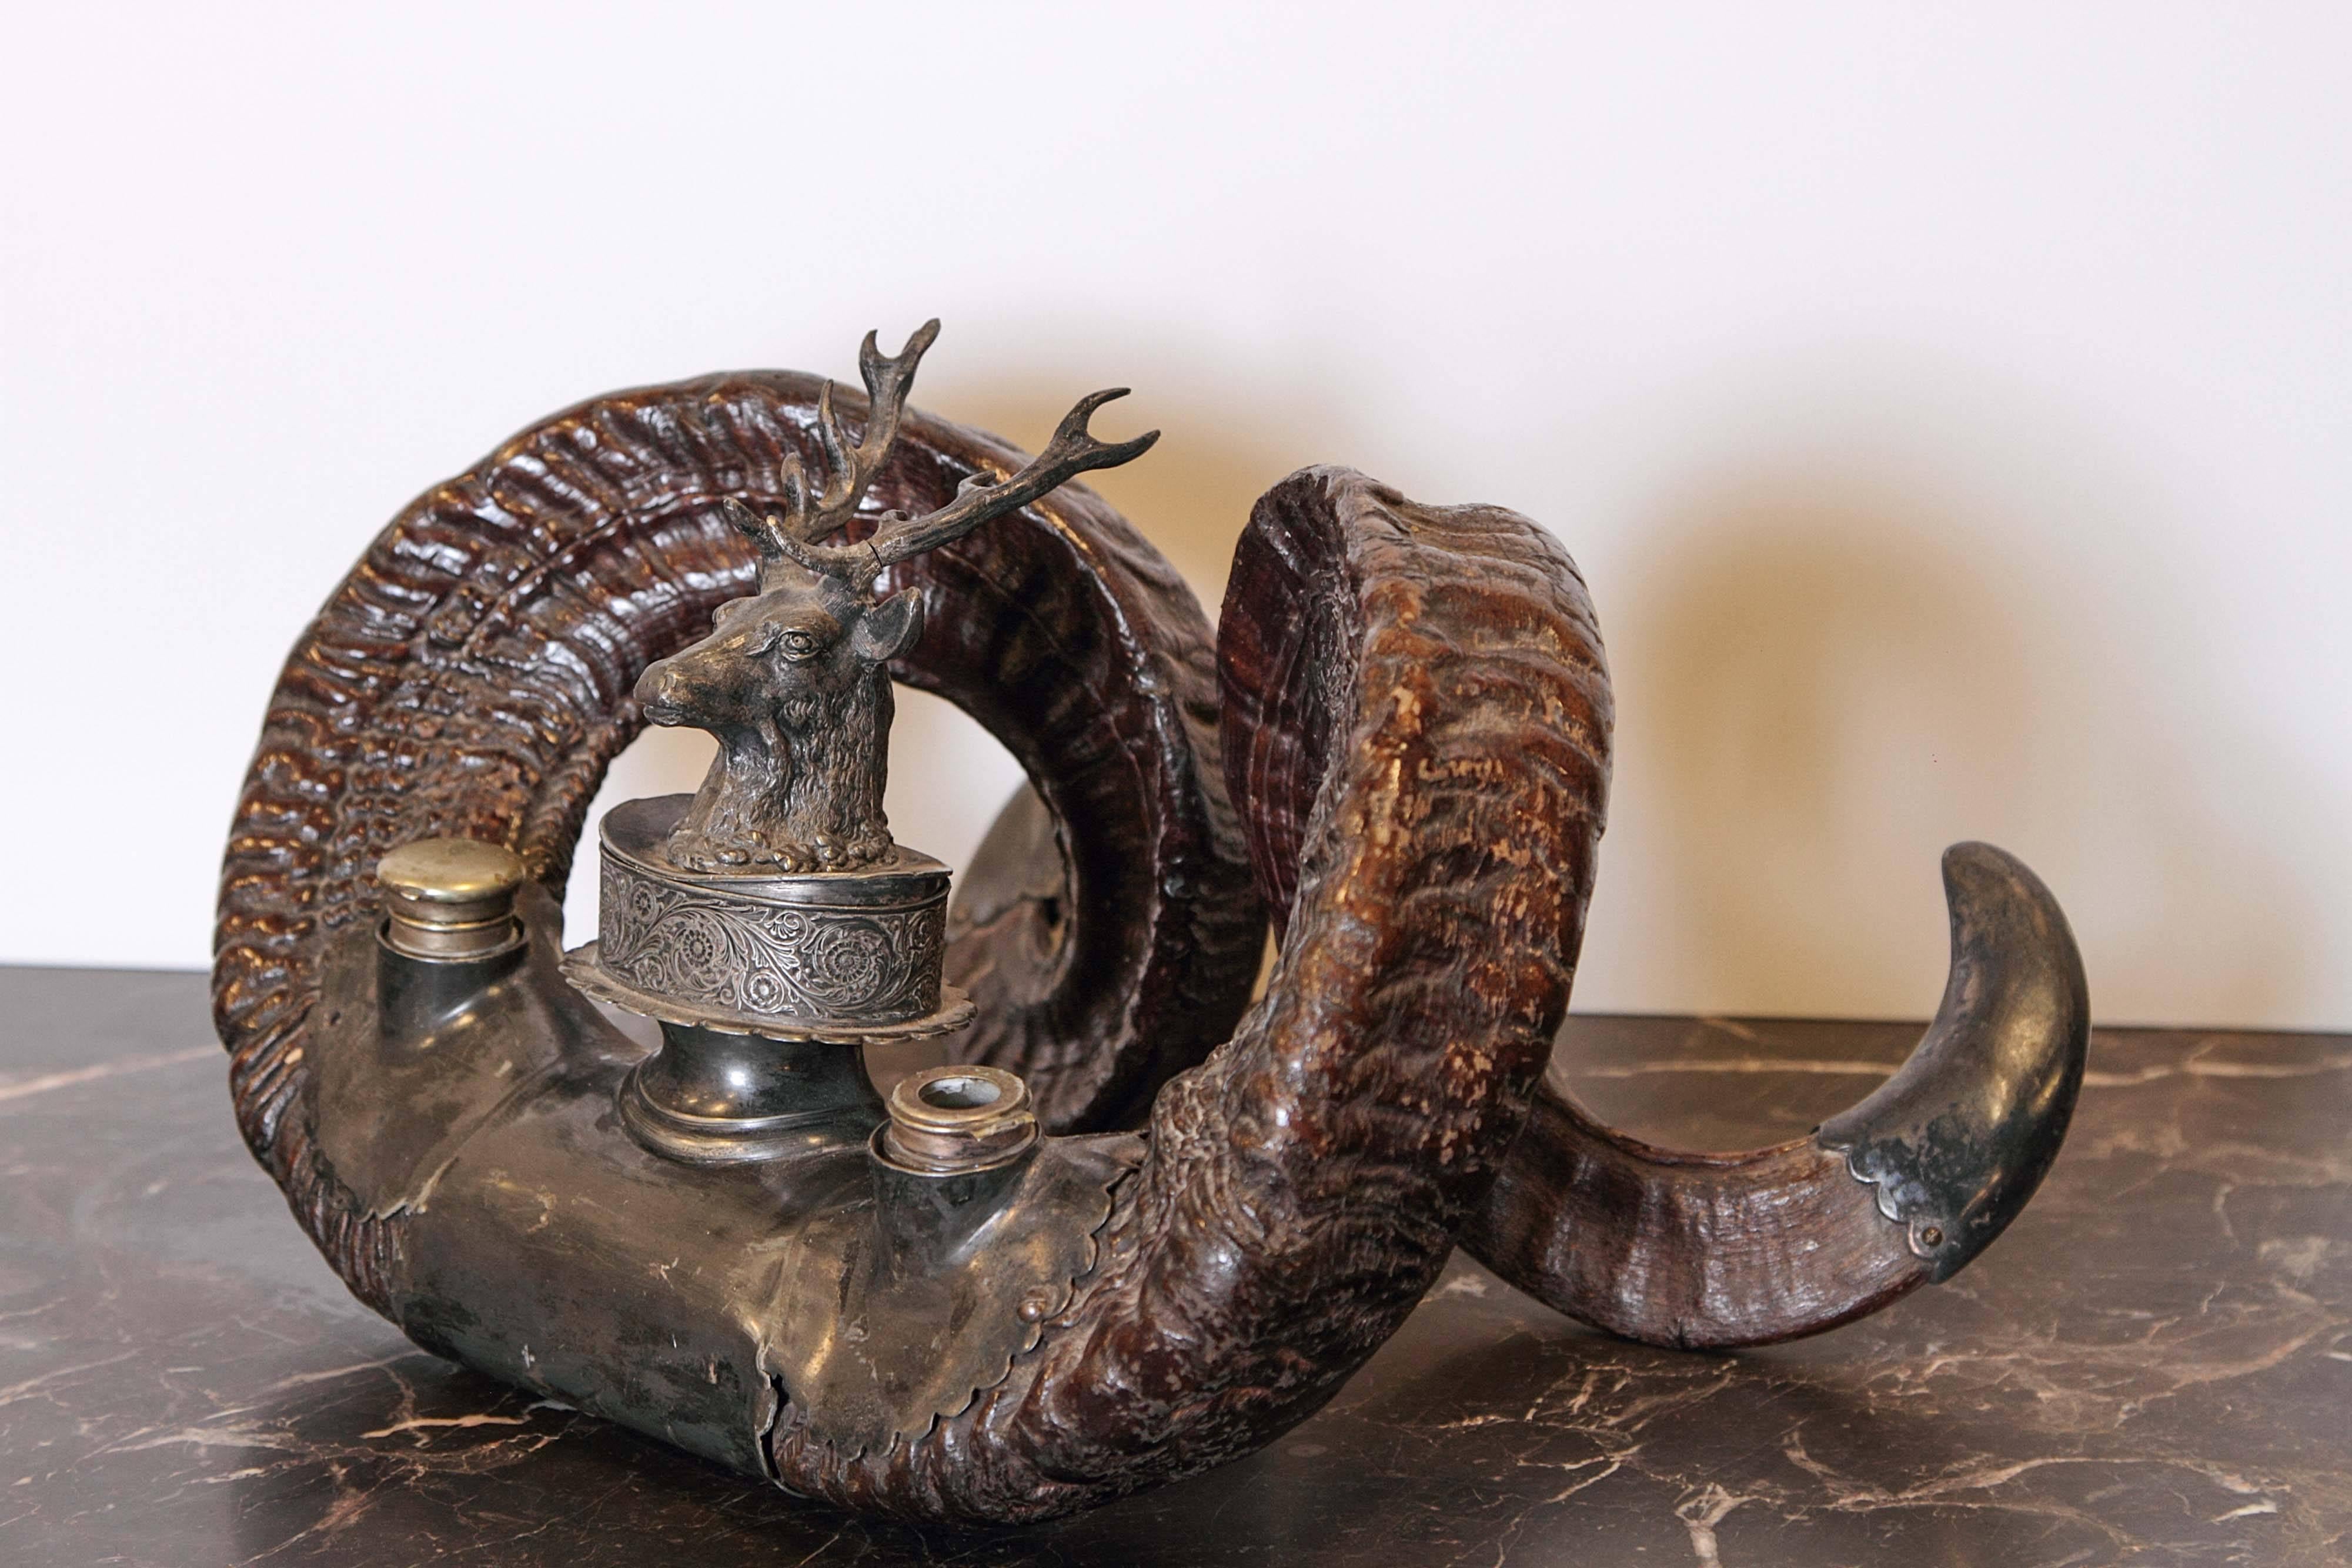 19th century English rams Horn inkwell with pewterl mounts and brass topped bottles.